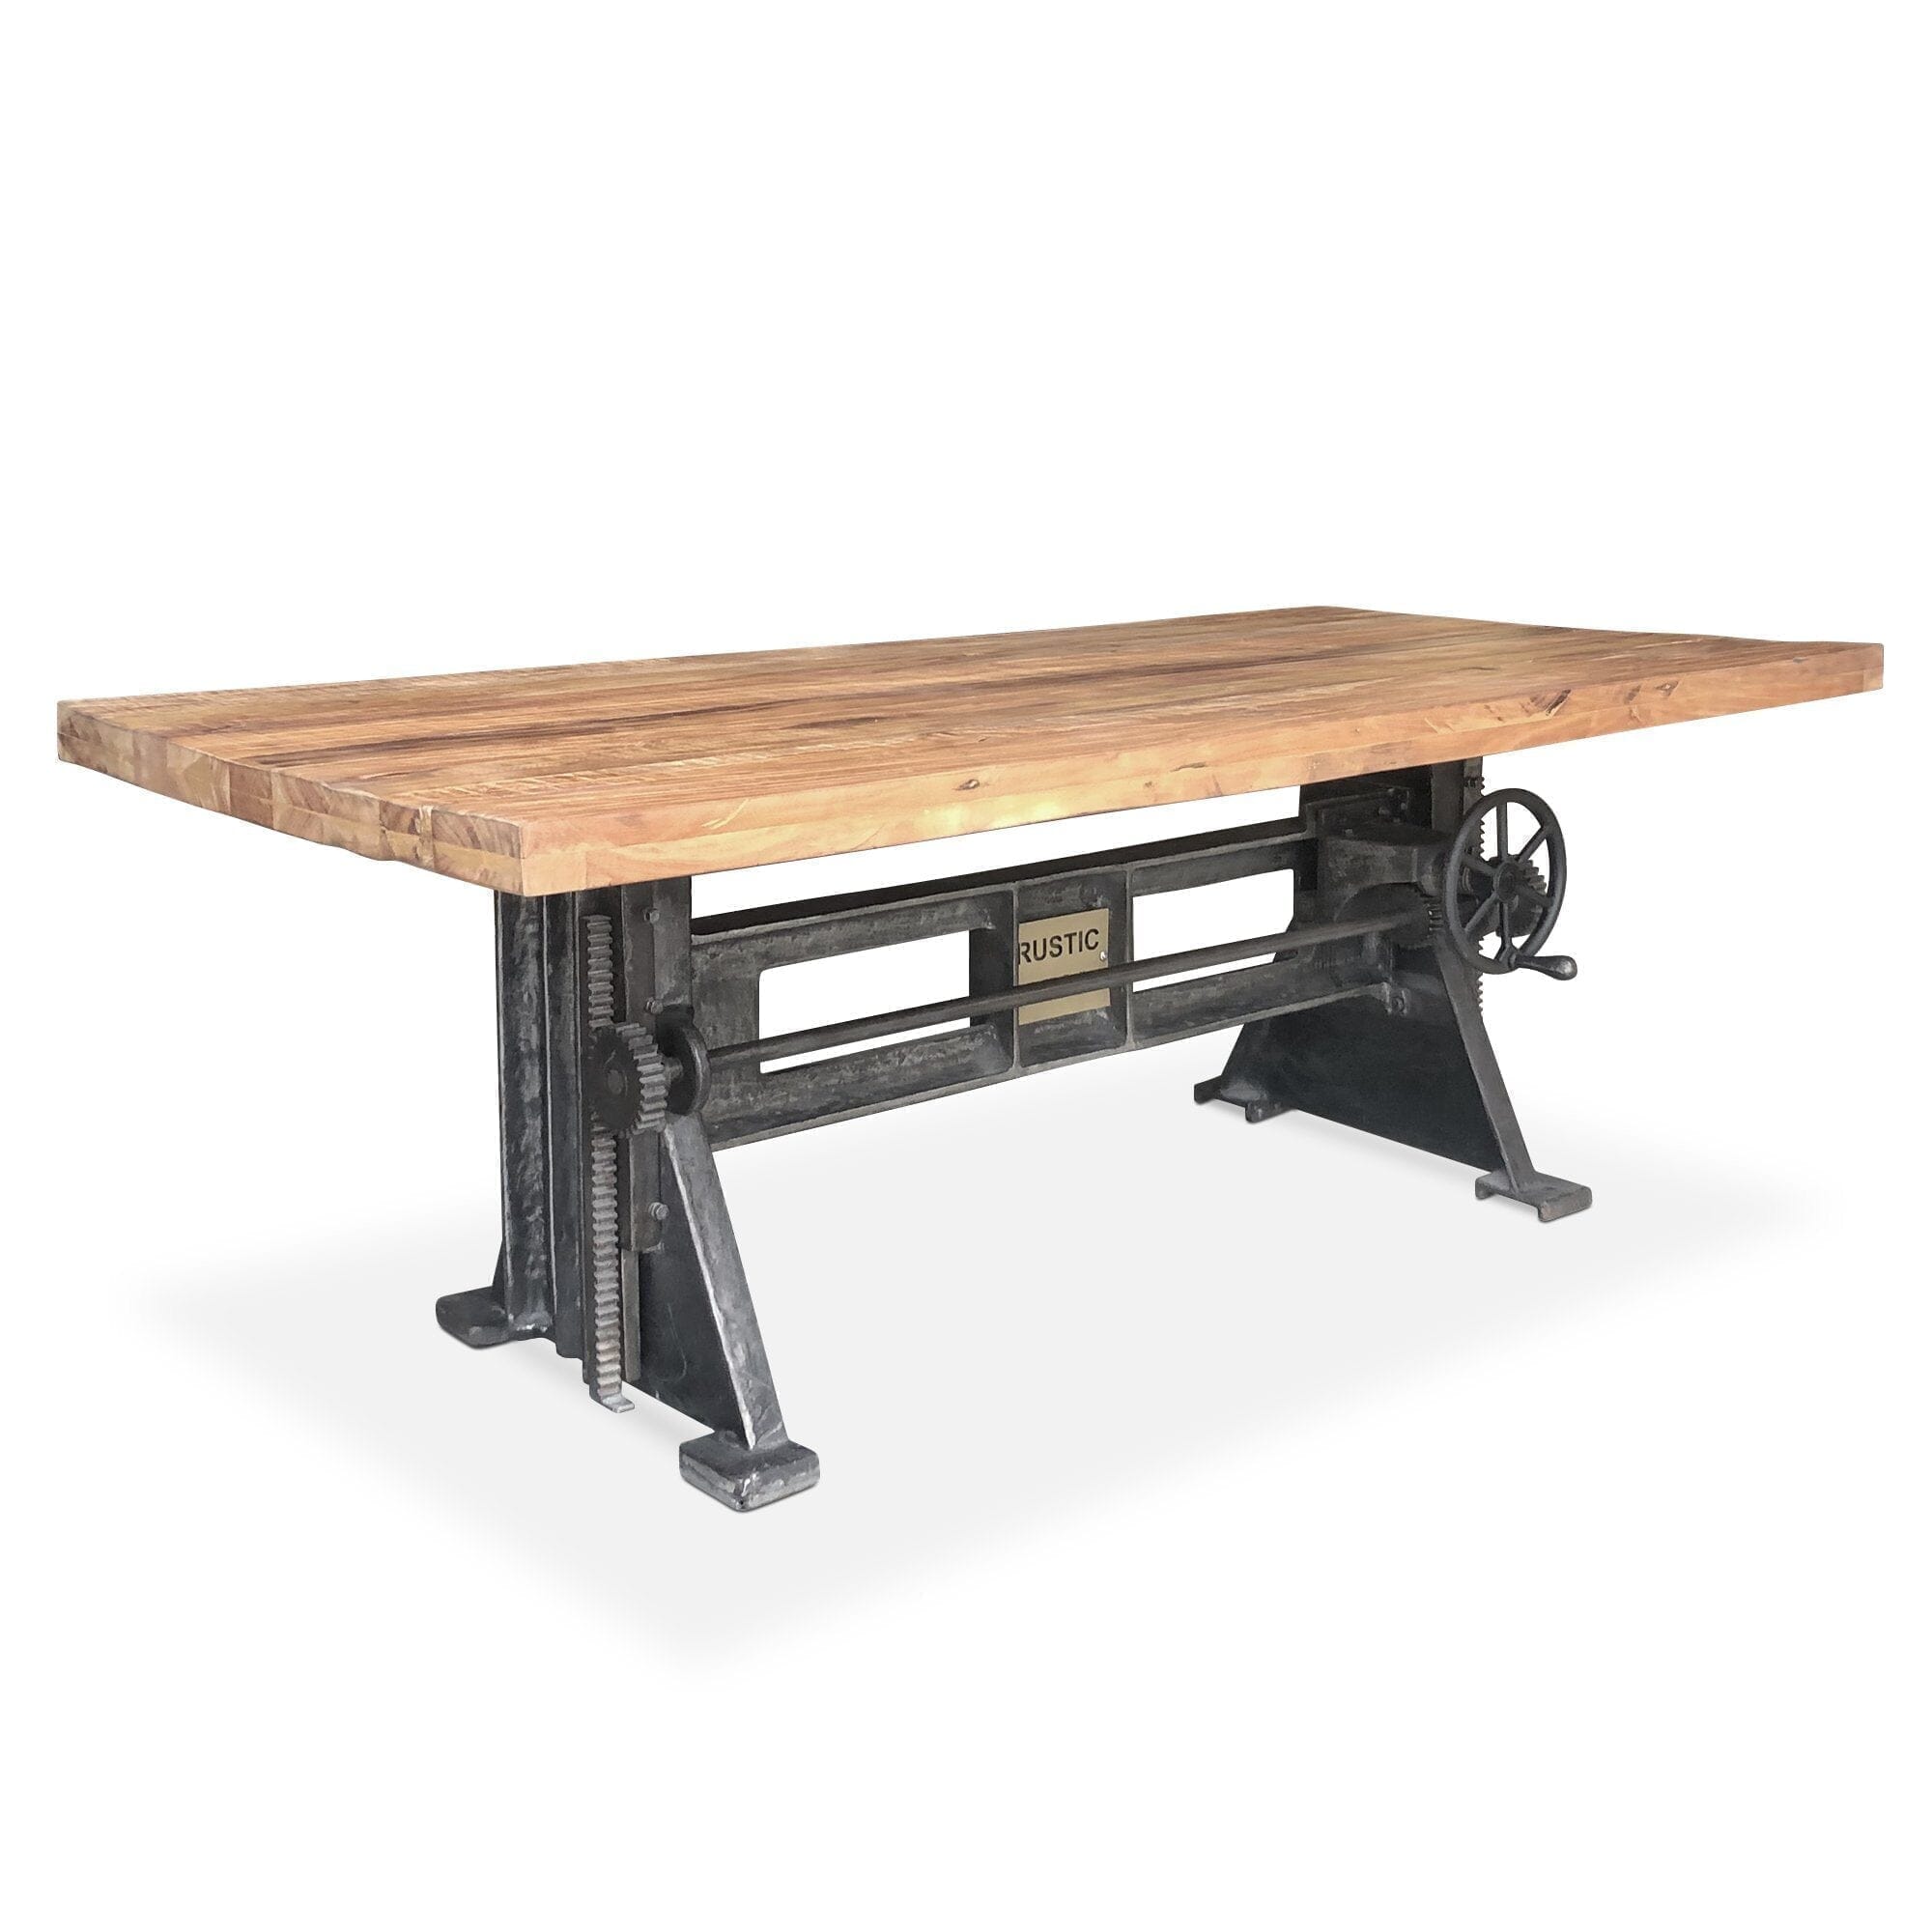 Craftsman Industrial Dining Table - Adjustable Height Iron Base